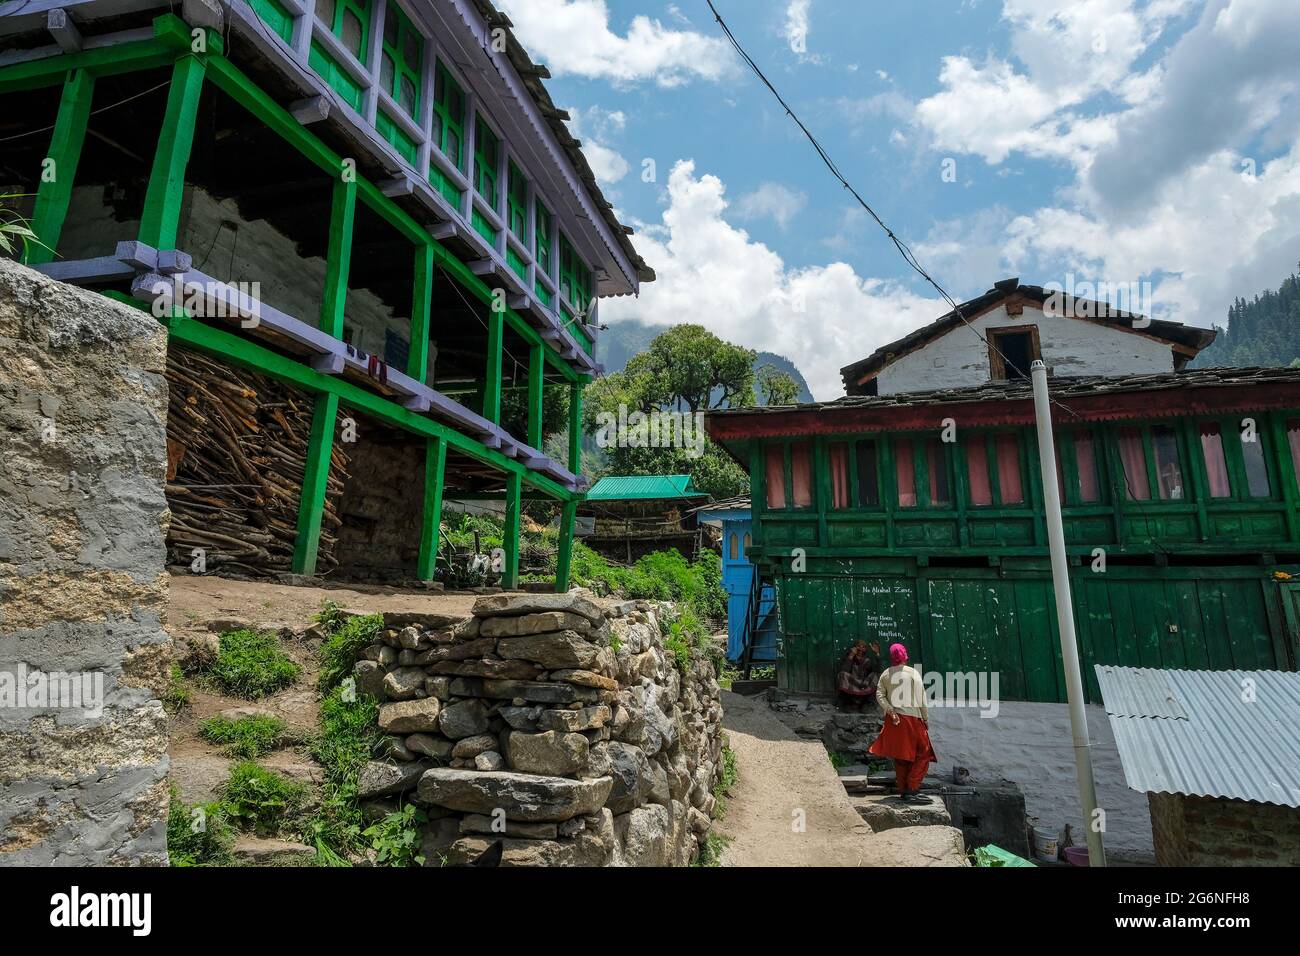 Nakthan, India - June 2021: Views of the village of Nakthan in the Parvati Valley on June 20, 2021 in Nakthan, Himachal Pradesh, India. Stock Photo